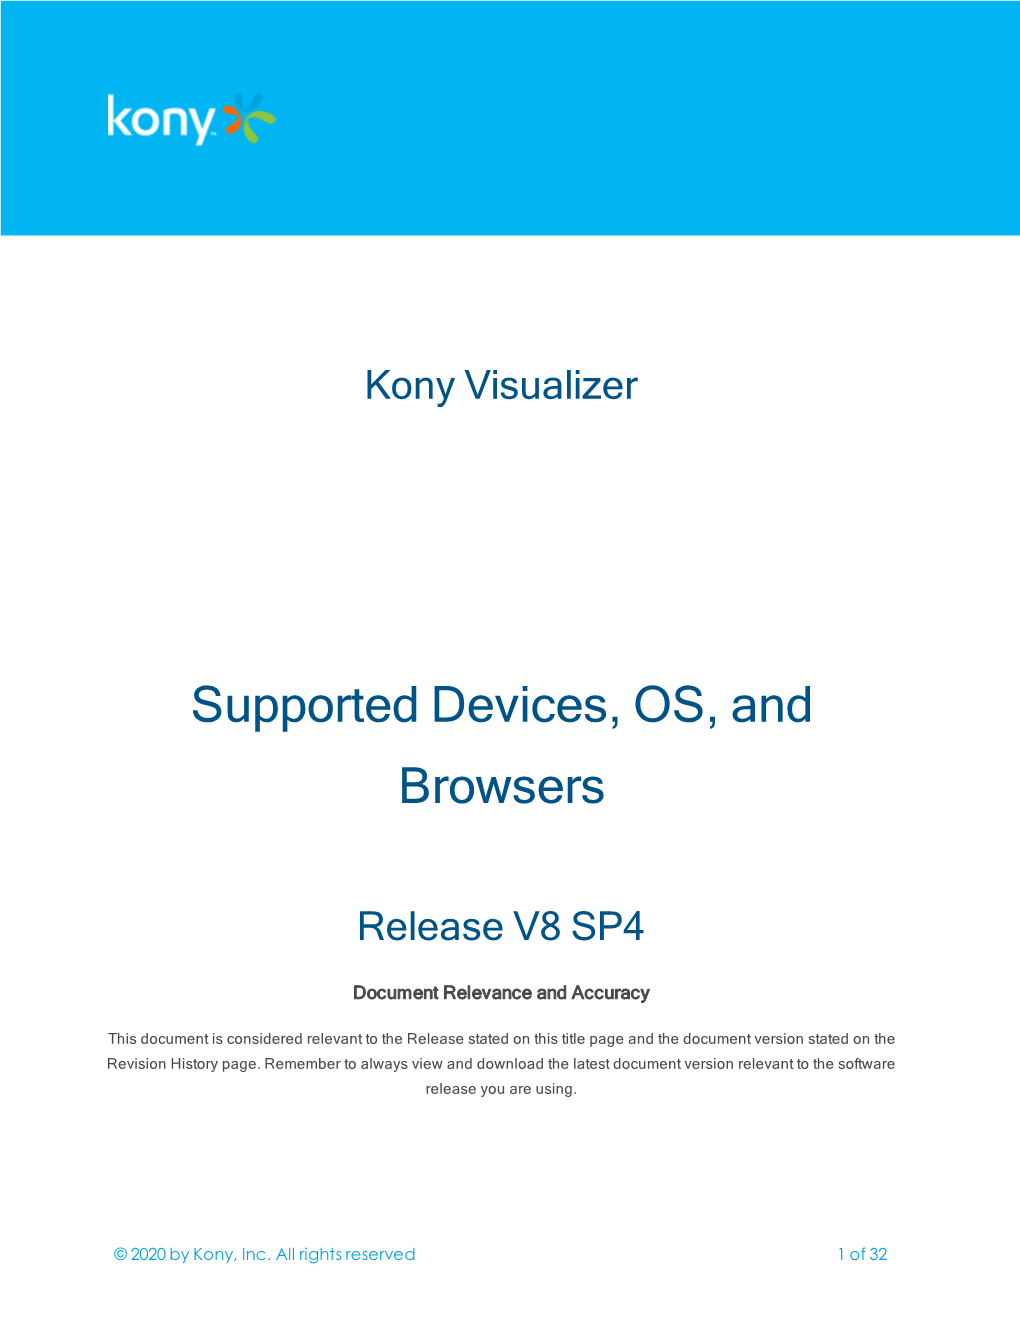 Konyproducts Supported Devices OS Browsers